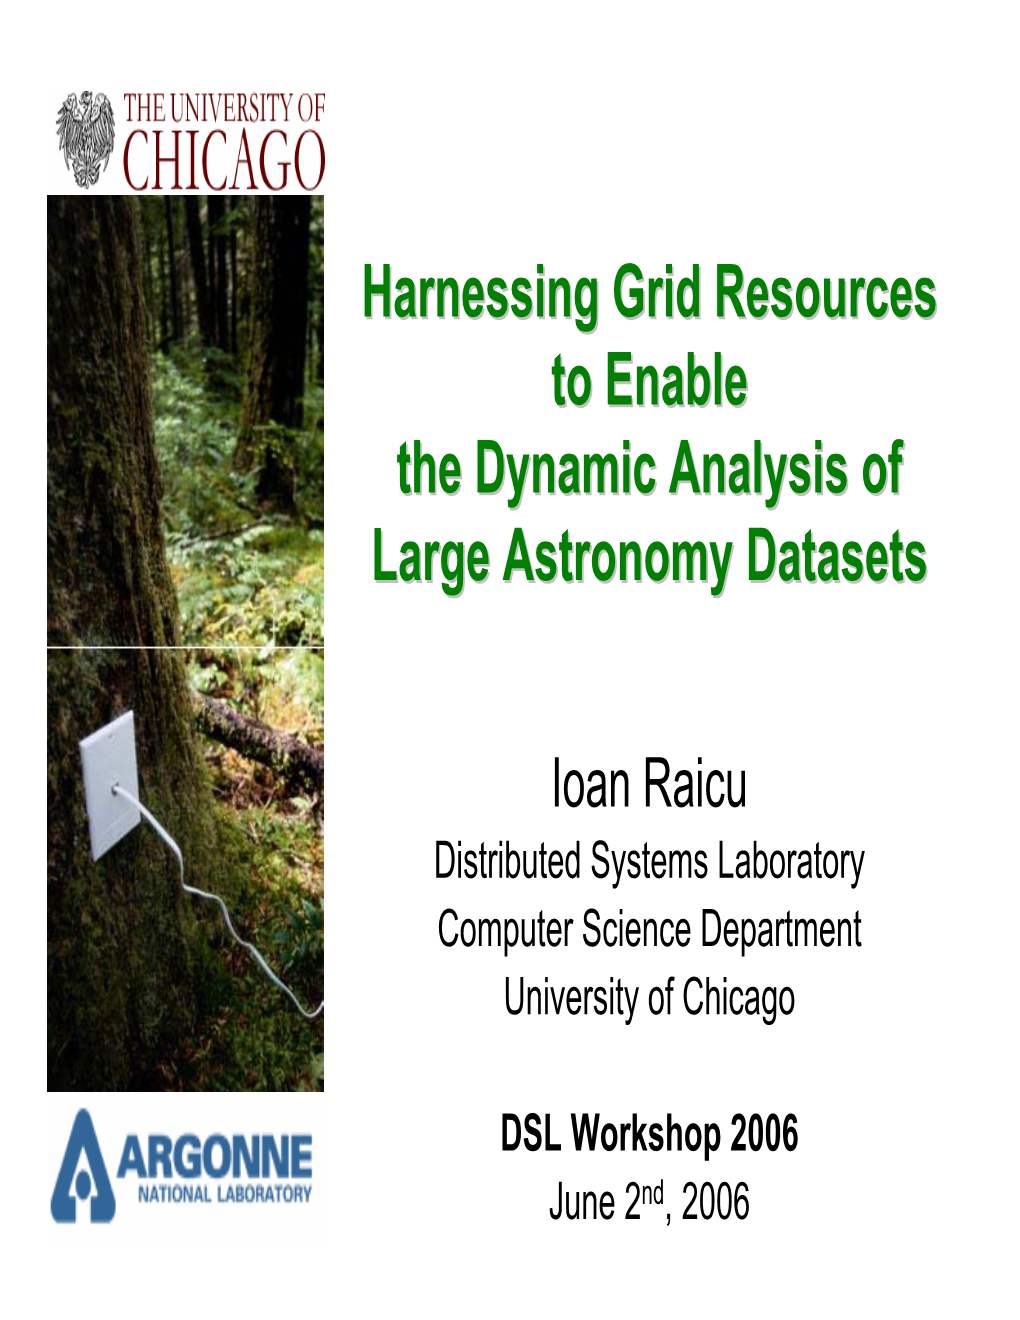 Harnessing Grid Resources to Enable the Dynamic Analysis of Large Astronomy Datasets”, Under Review at Supercomputing 2006